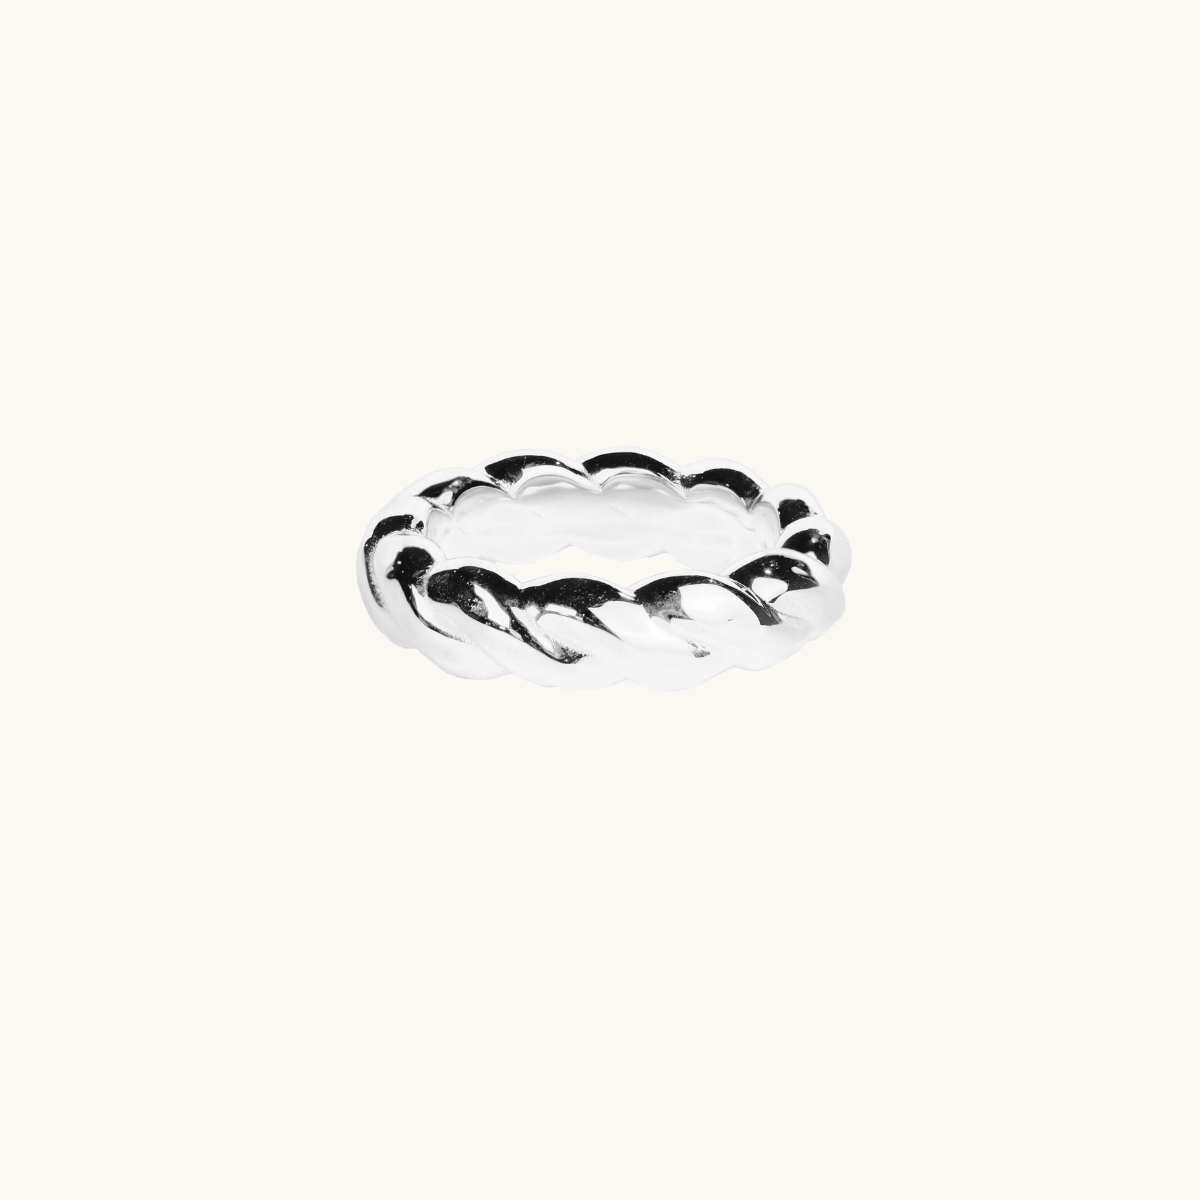 a band ring in a twisted pattern in sterling silver